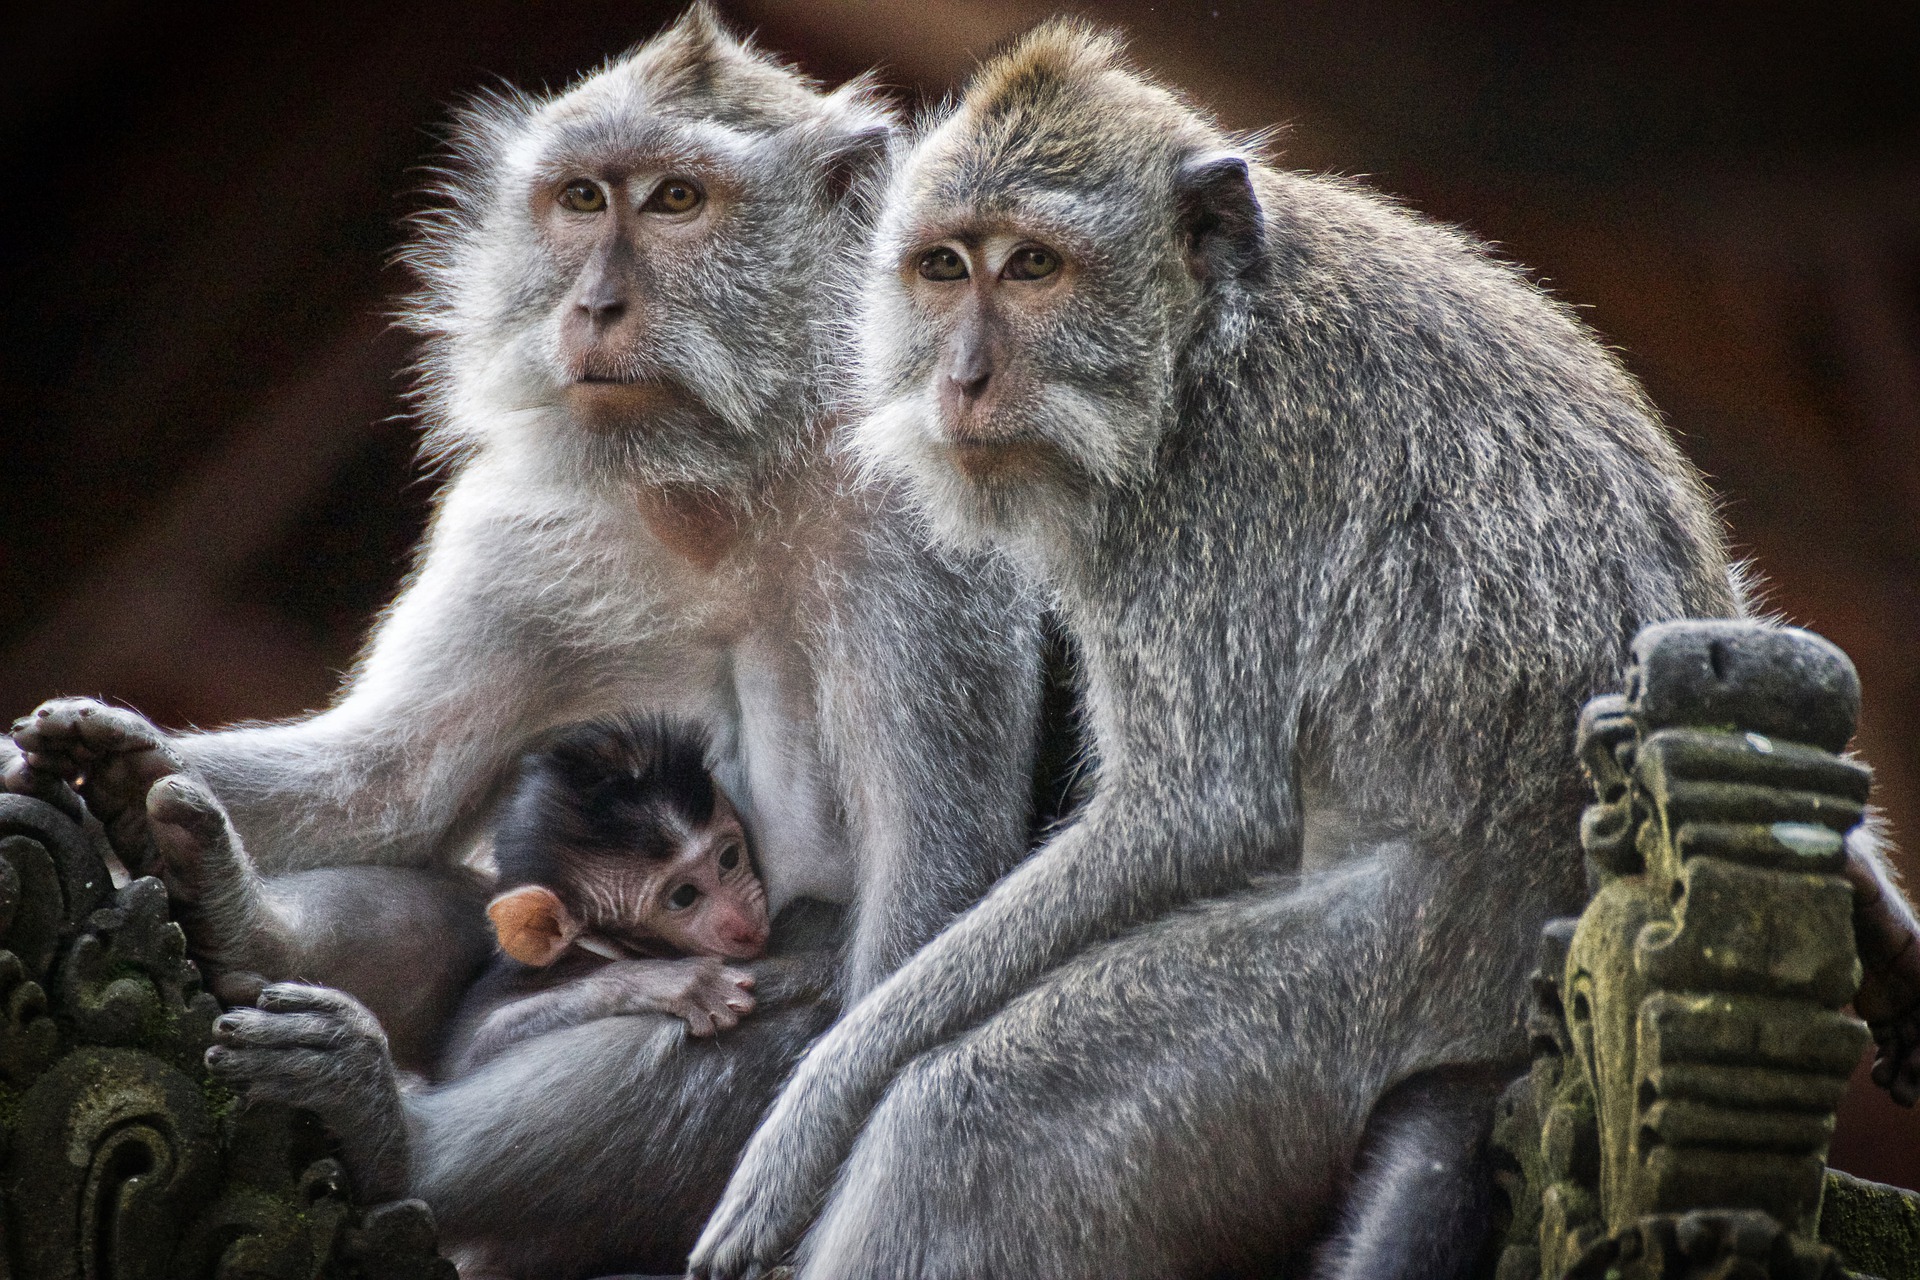 Macaque Family With Baby by qgadrian